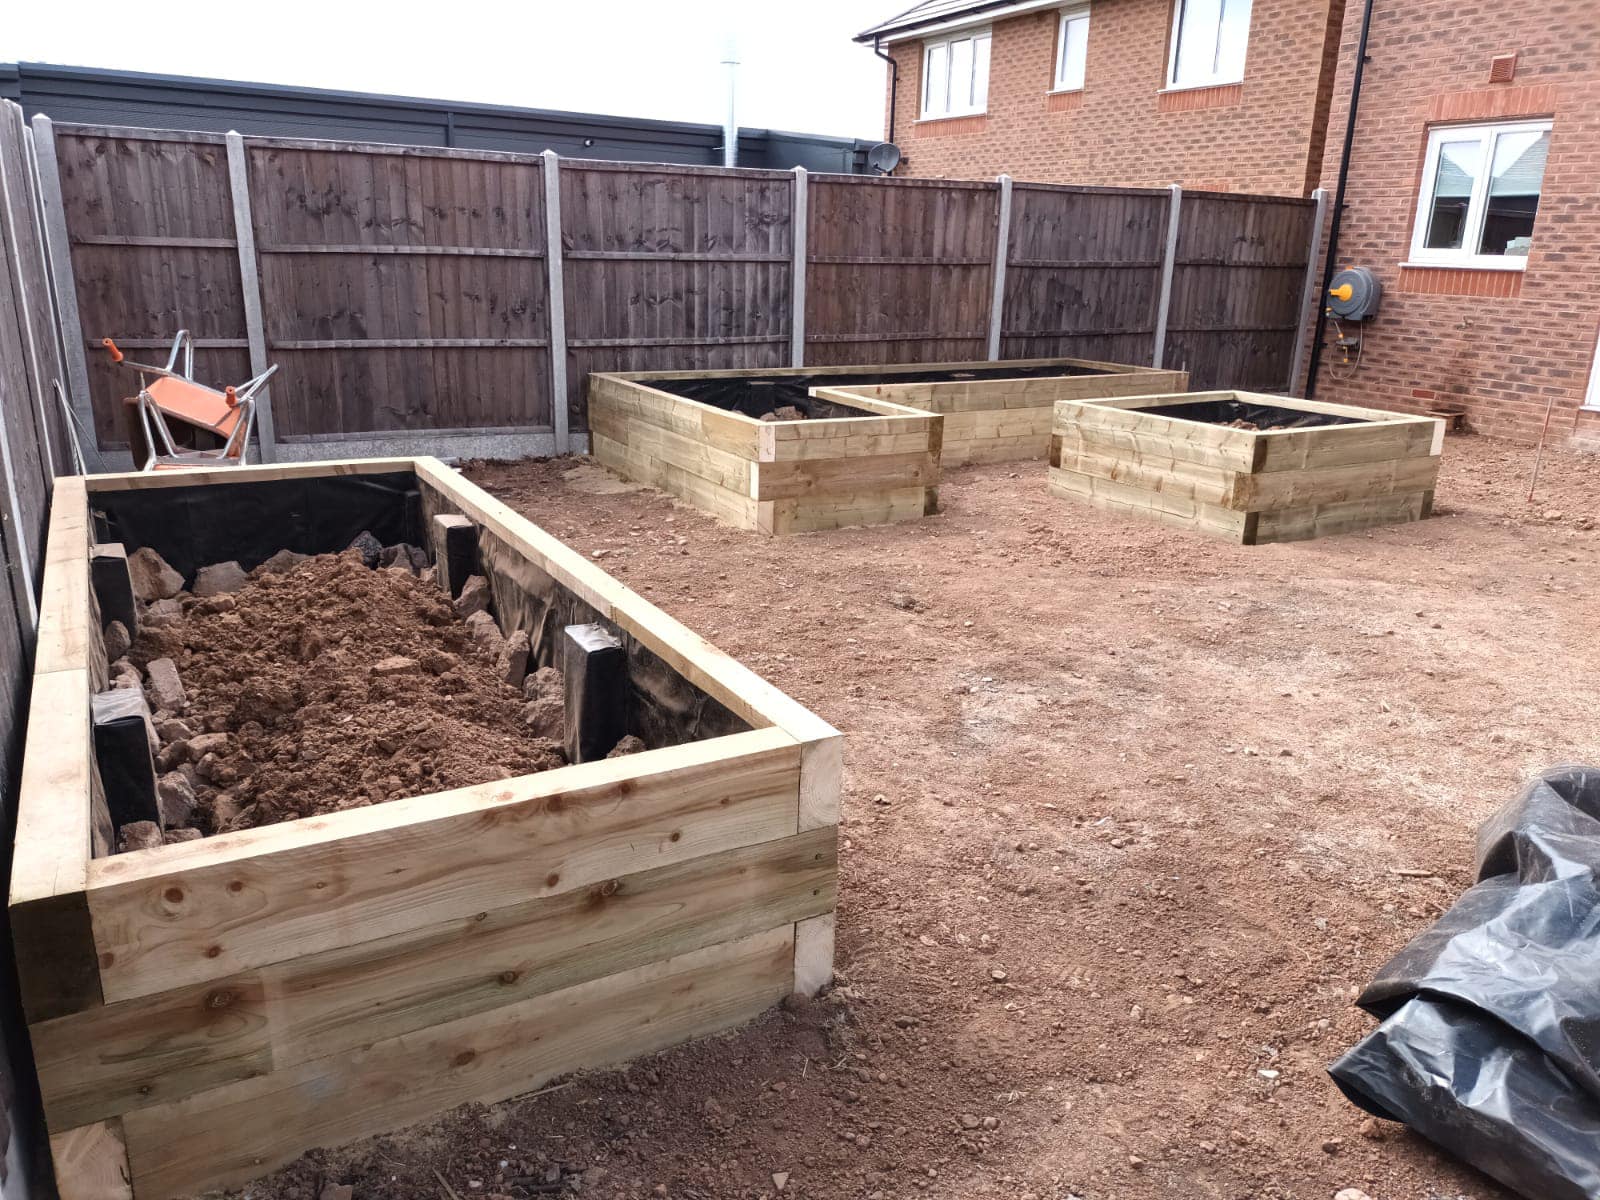 Cottage of Suburbia - During - Raised beds being filled with soil